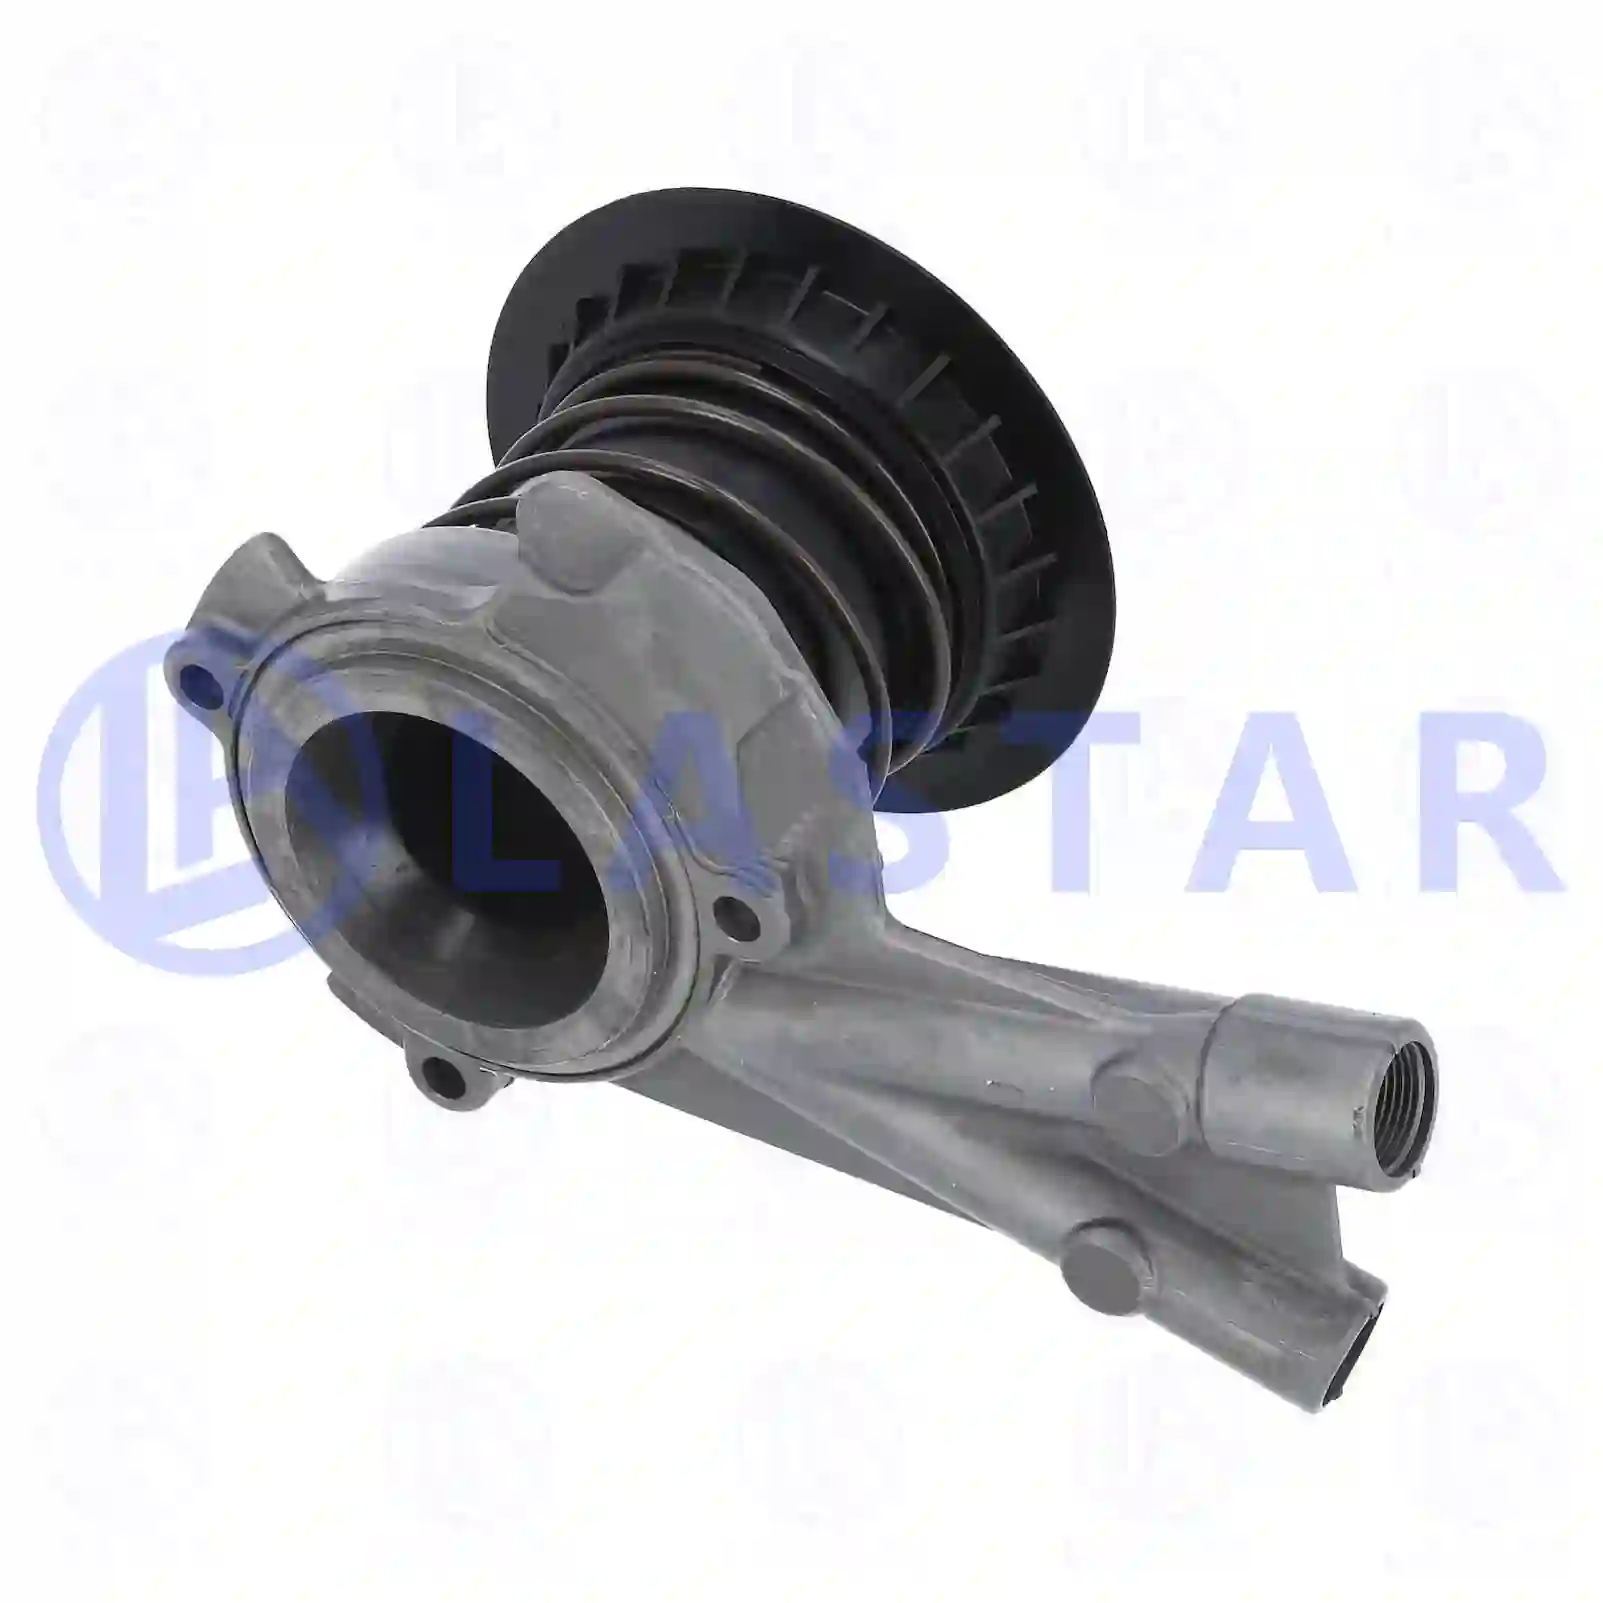 Release bearing, 77721928, X8882824, 41700-T1219, 81305500091, 81305500105, 81305506101, 81307166101, 0002500420, 0002540320, 0002540420, 0002543020, 0022501915, 0022502115, 0022502215, 0022502715, 0022502915, 0022503115, 0022505115, 0022506615, 0022540320, 0022540420, 20376130, 3095402, 3952876, 3953503 ||  77721928 Lastar Spare Part | Truck Spare Parts, Auotomotive Spare Parts Release bearing, 77721928, X8882824, 41700-T1219, 81305500091, 81305500105, 81305506101, 81307166101, 0002500420, 0002540320, 0002540420, 0002543020, 0022501915, 0022502115, 0022502215, 0022502715, 0022502915, 0022503115, 0022505115, 0022506615, 0022540320, 0022540420, 20376130, 3095402, 3952876, 3953503 ||  77721928 Lastar Spare Part | Truck Spare Parts, Auotomotive Spare Parts